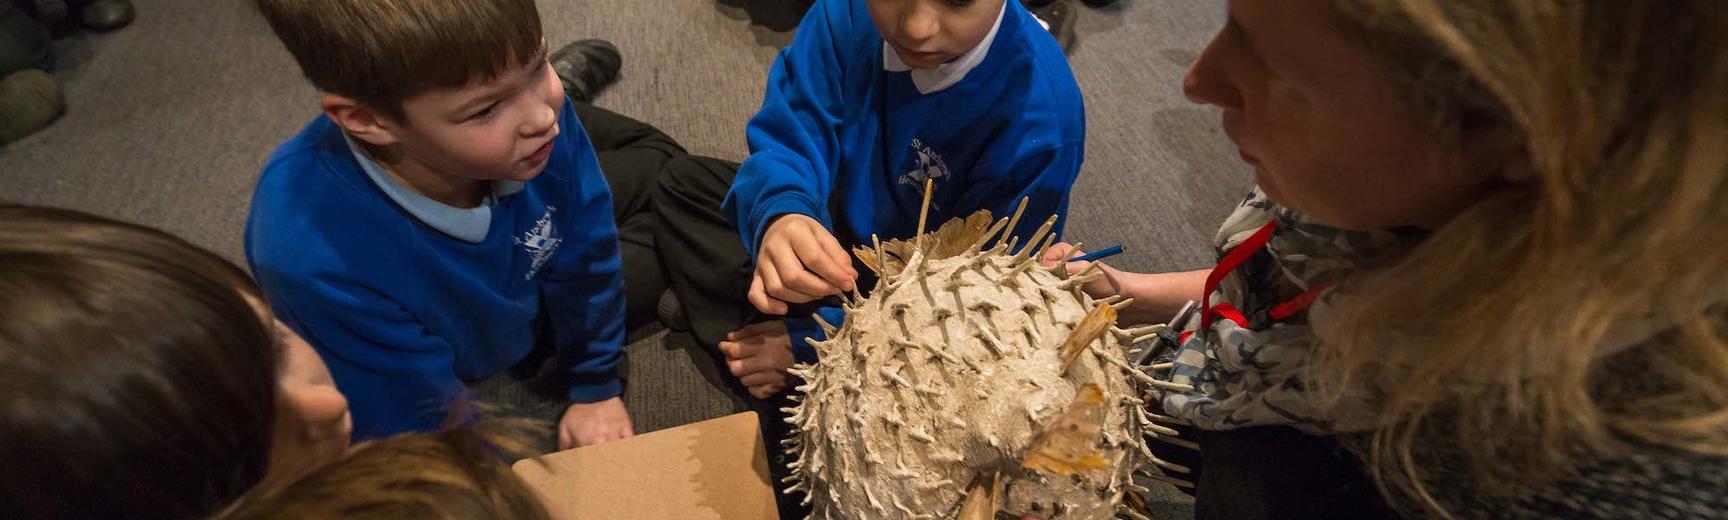 Primary school pupils sit on floor and handle an ivory coloured, oval-shaped helmet with long spikes protruding from all around it